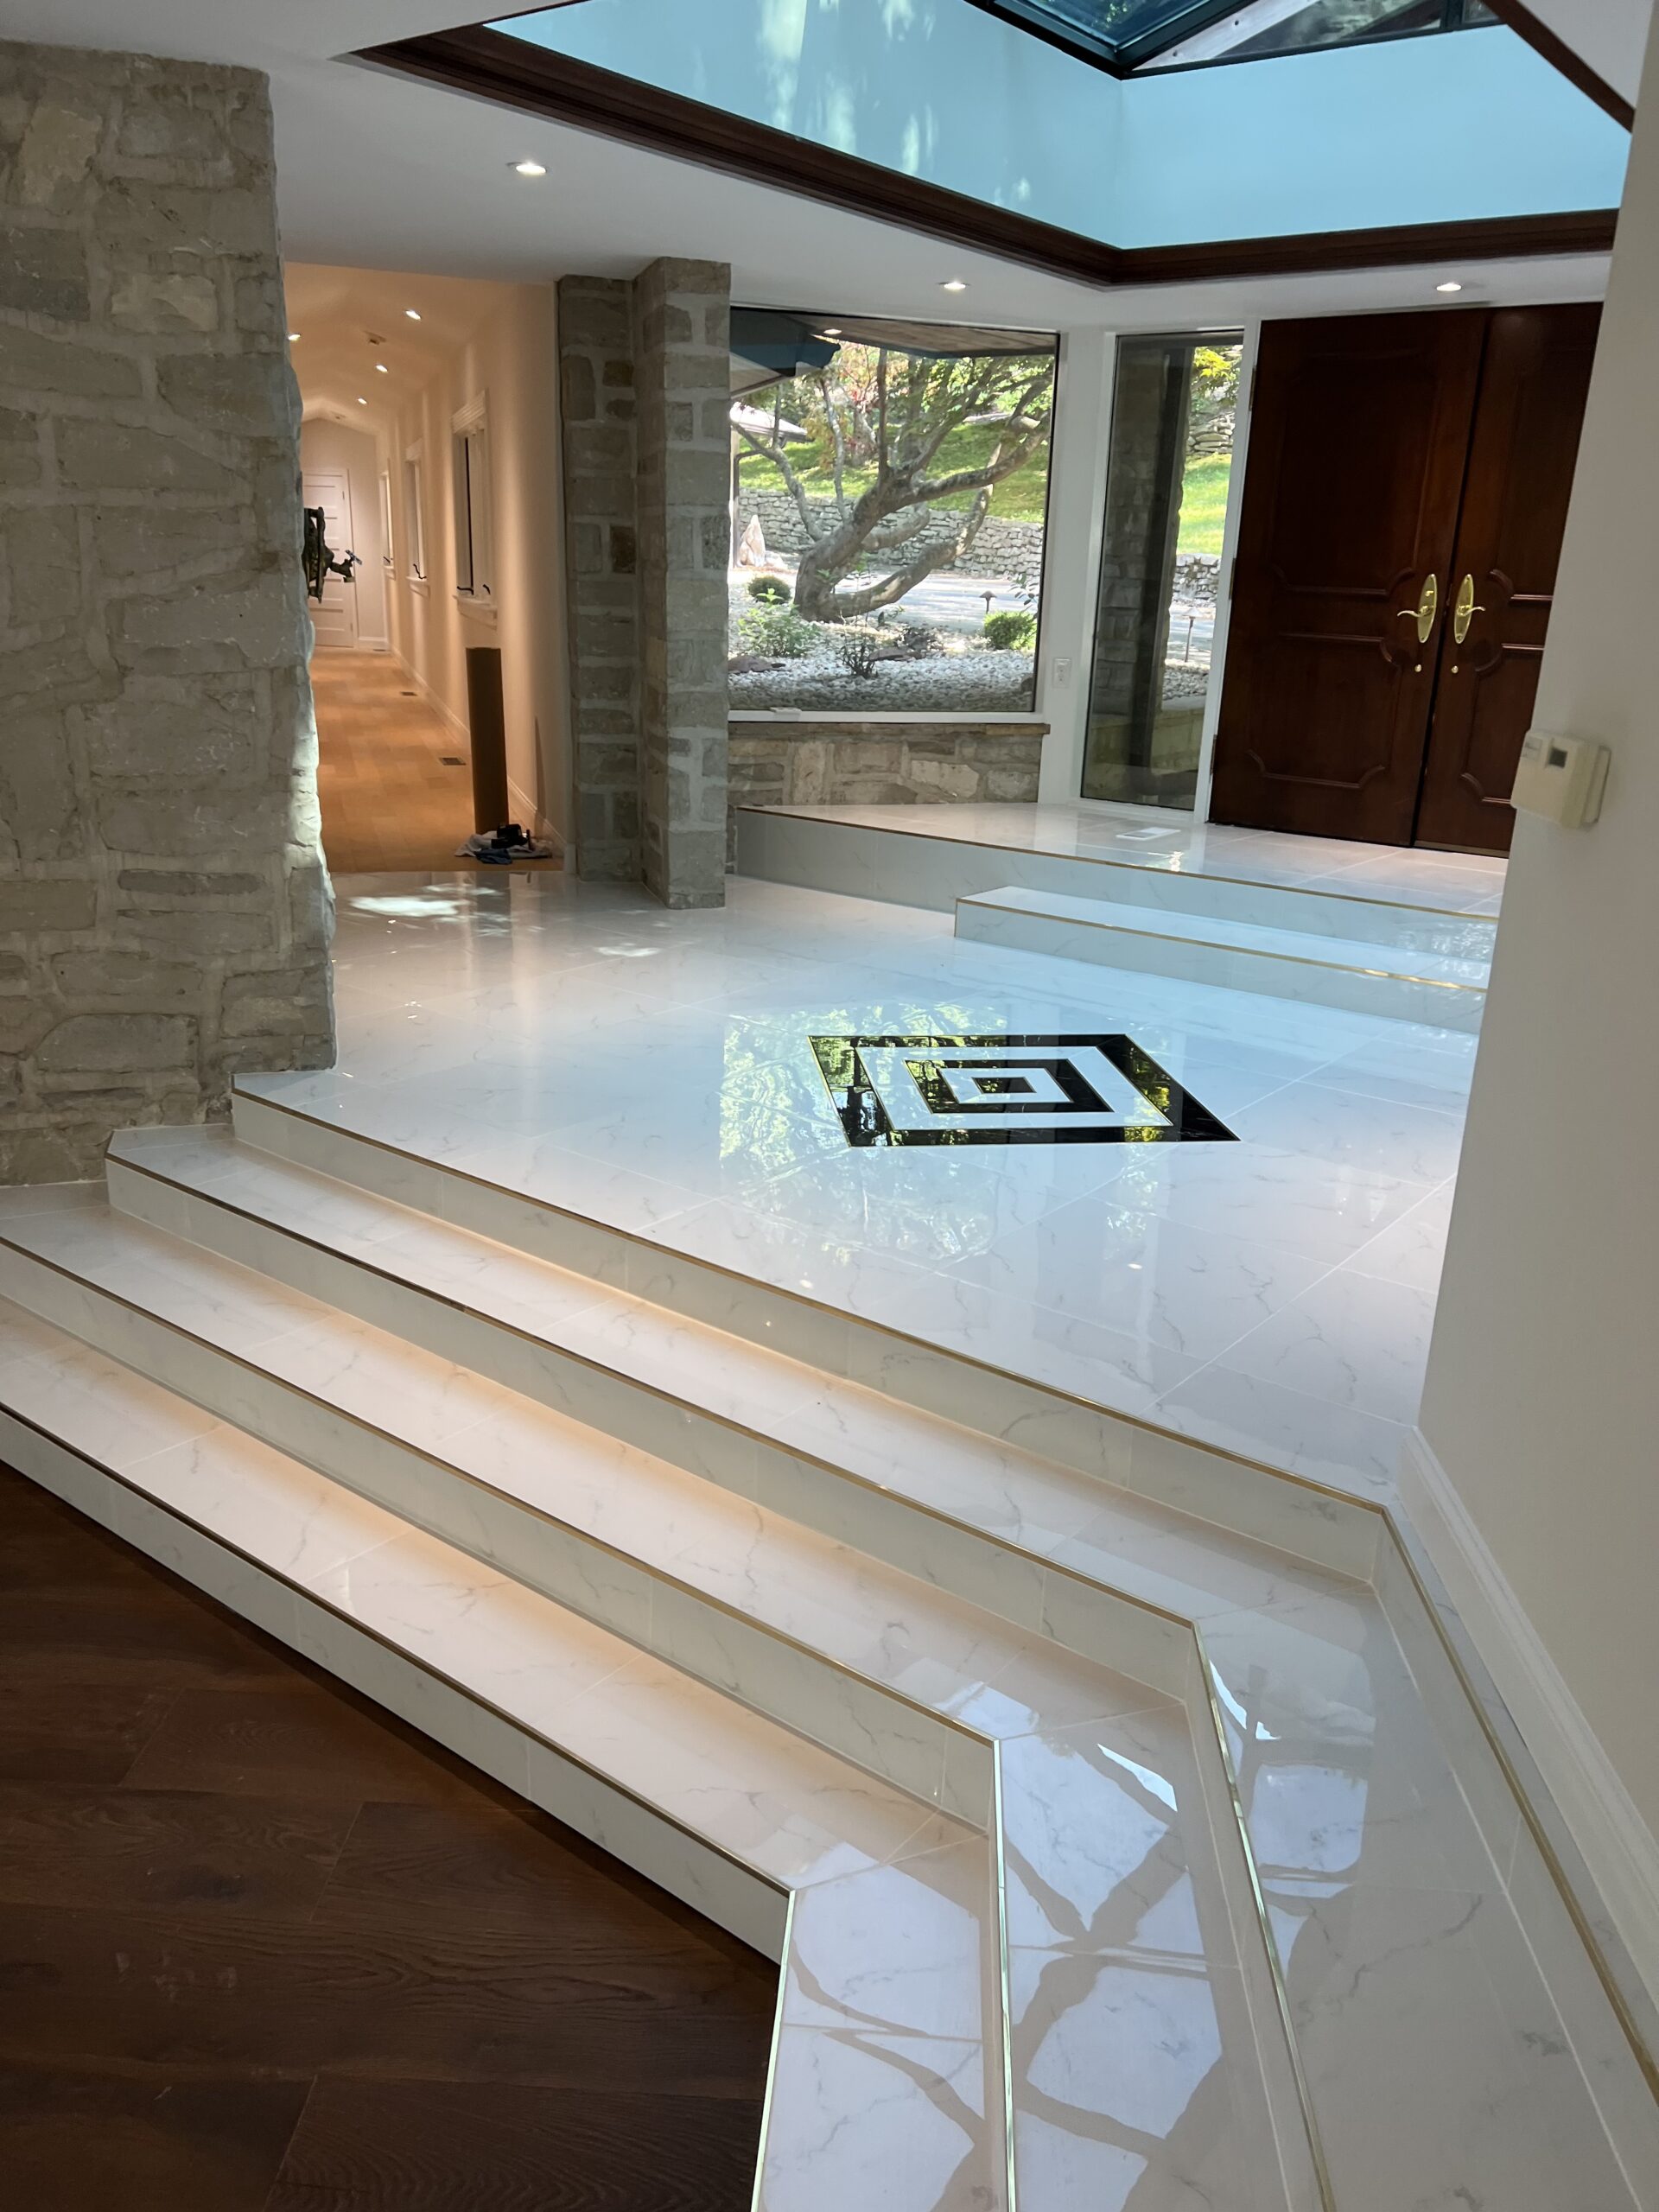 Black and white tiles in square pattern with tile stairs and wooden floor in view